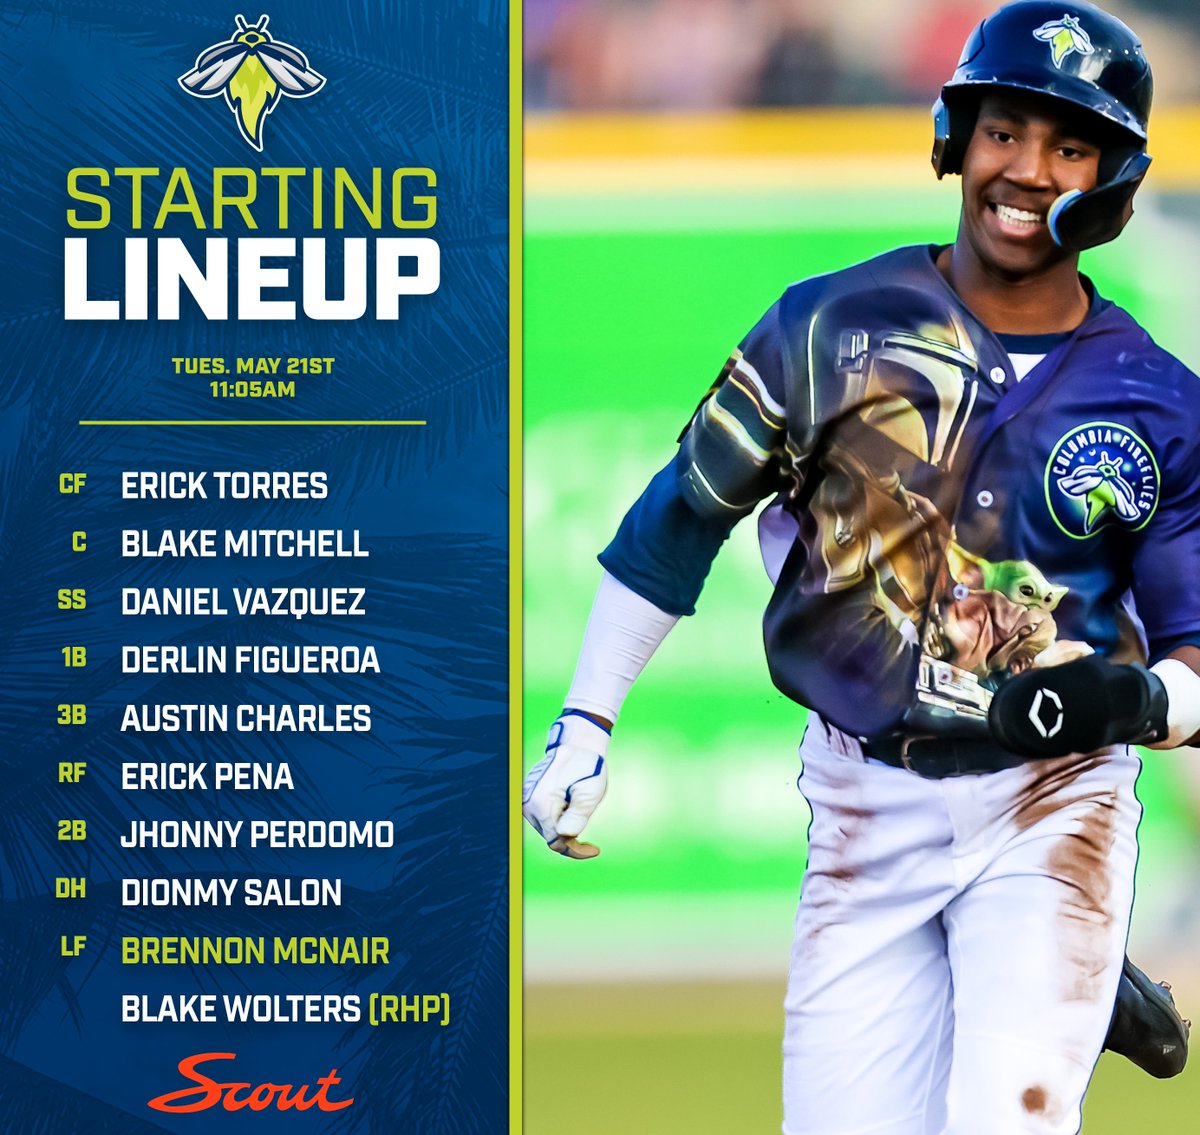 We're starting a fresh series vs the Shorebirds this morning, Powered by Scout Motors! #LetsGlow